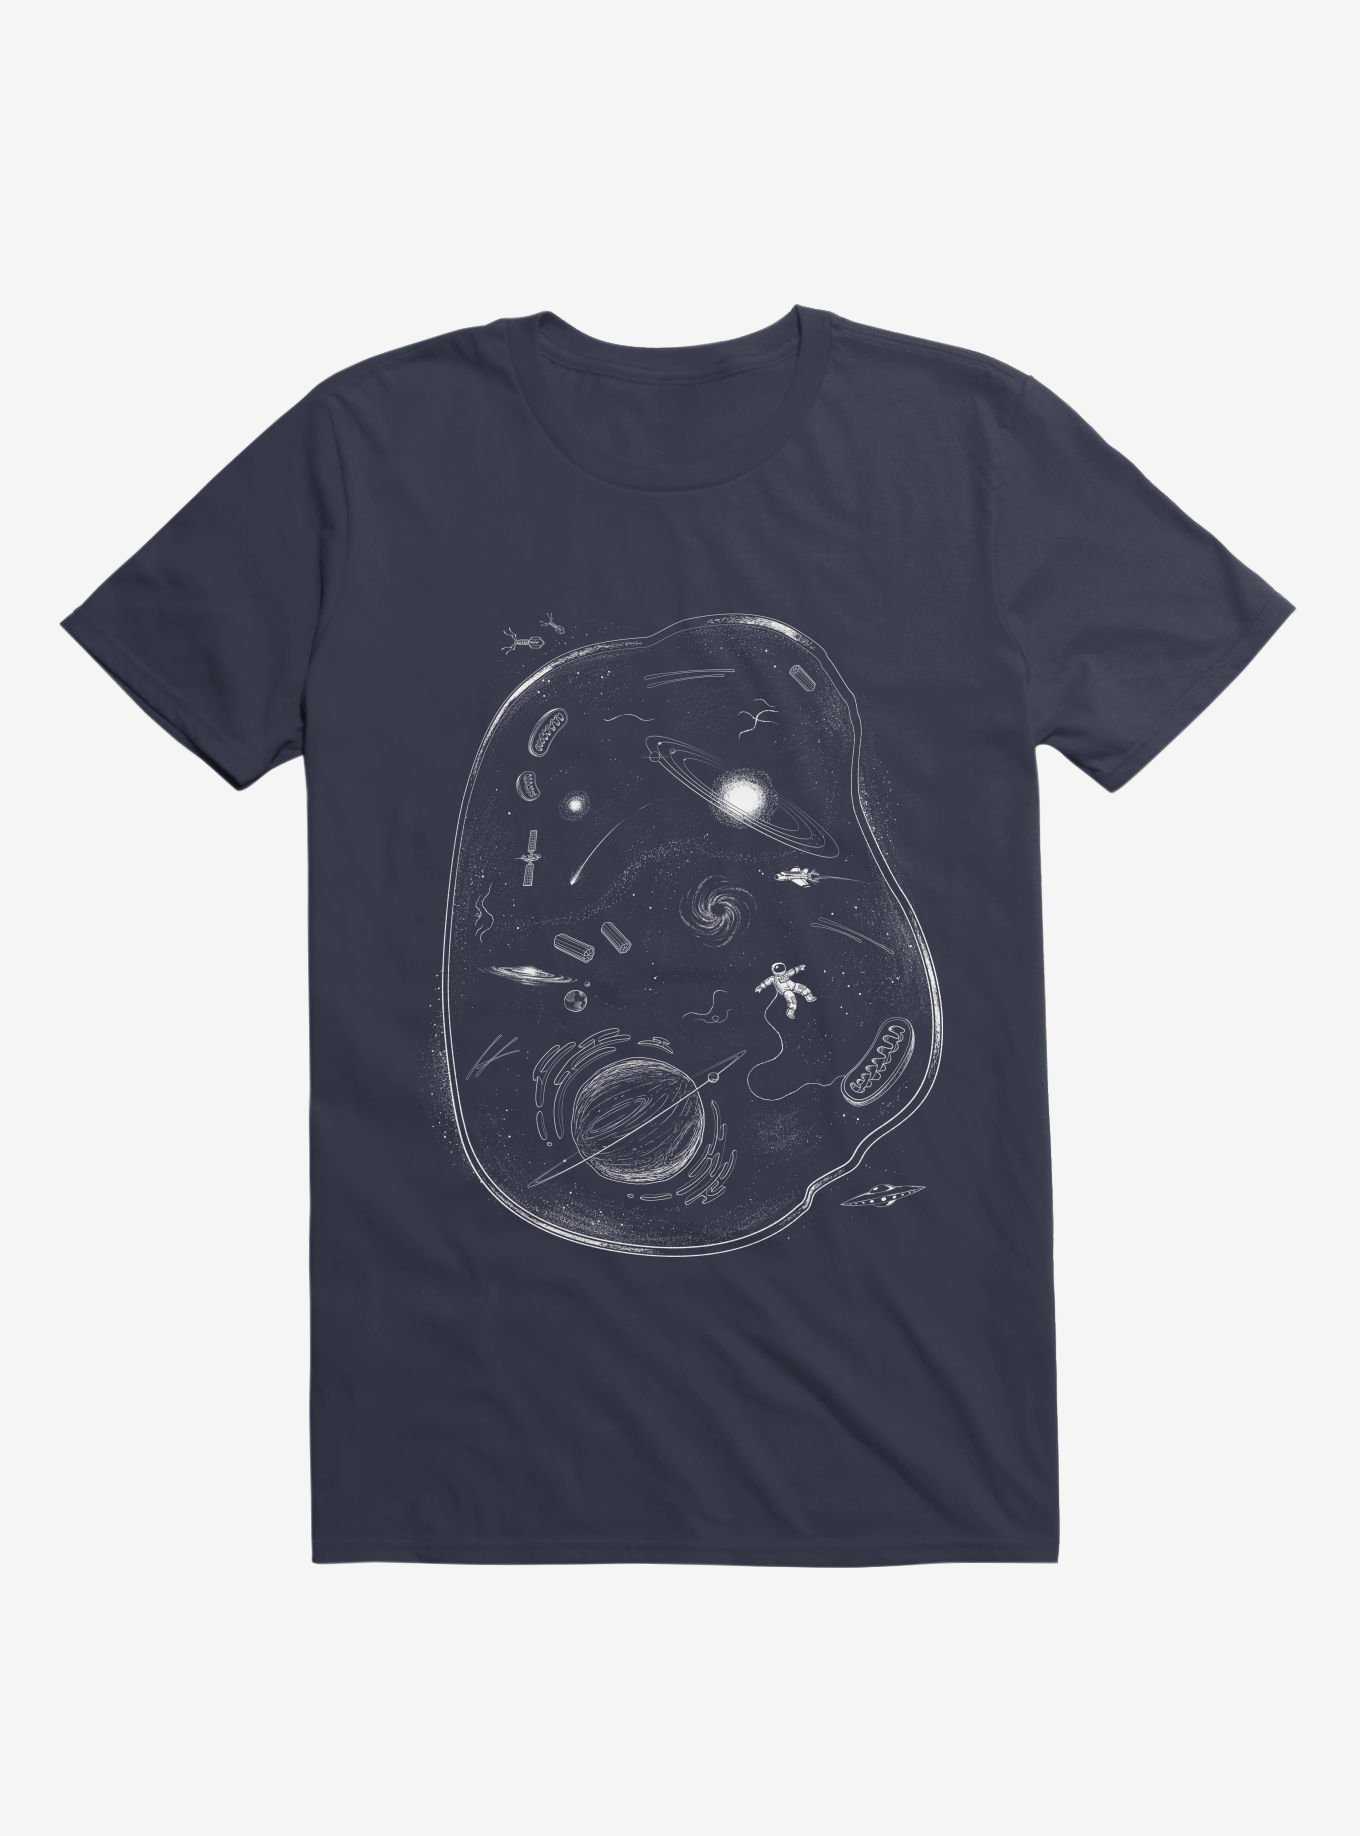 We Are Made Of Stars Navy Blue T-Shirt, , hi-res